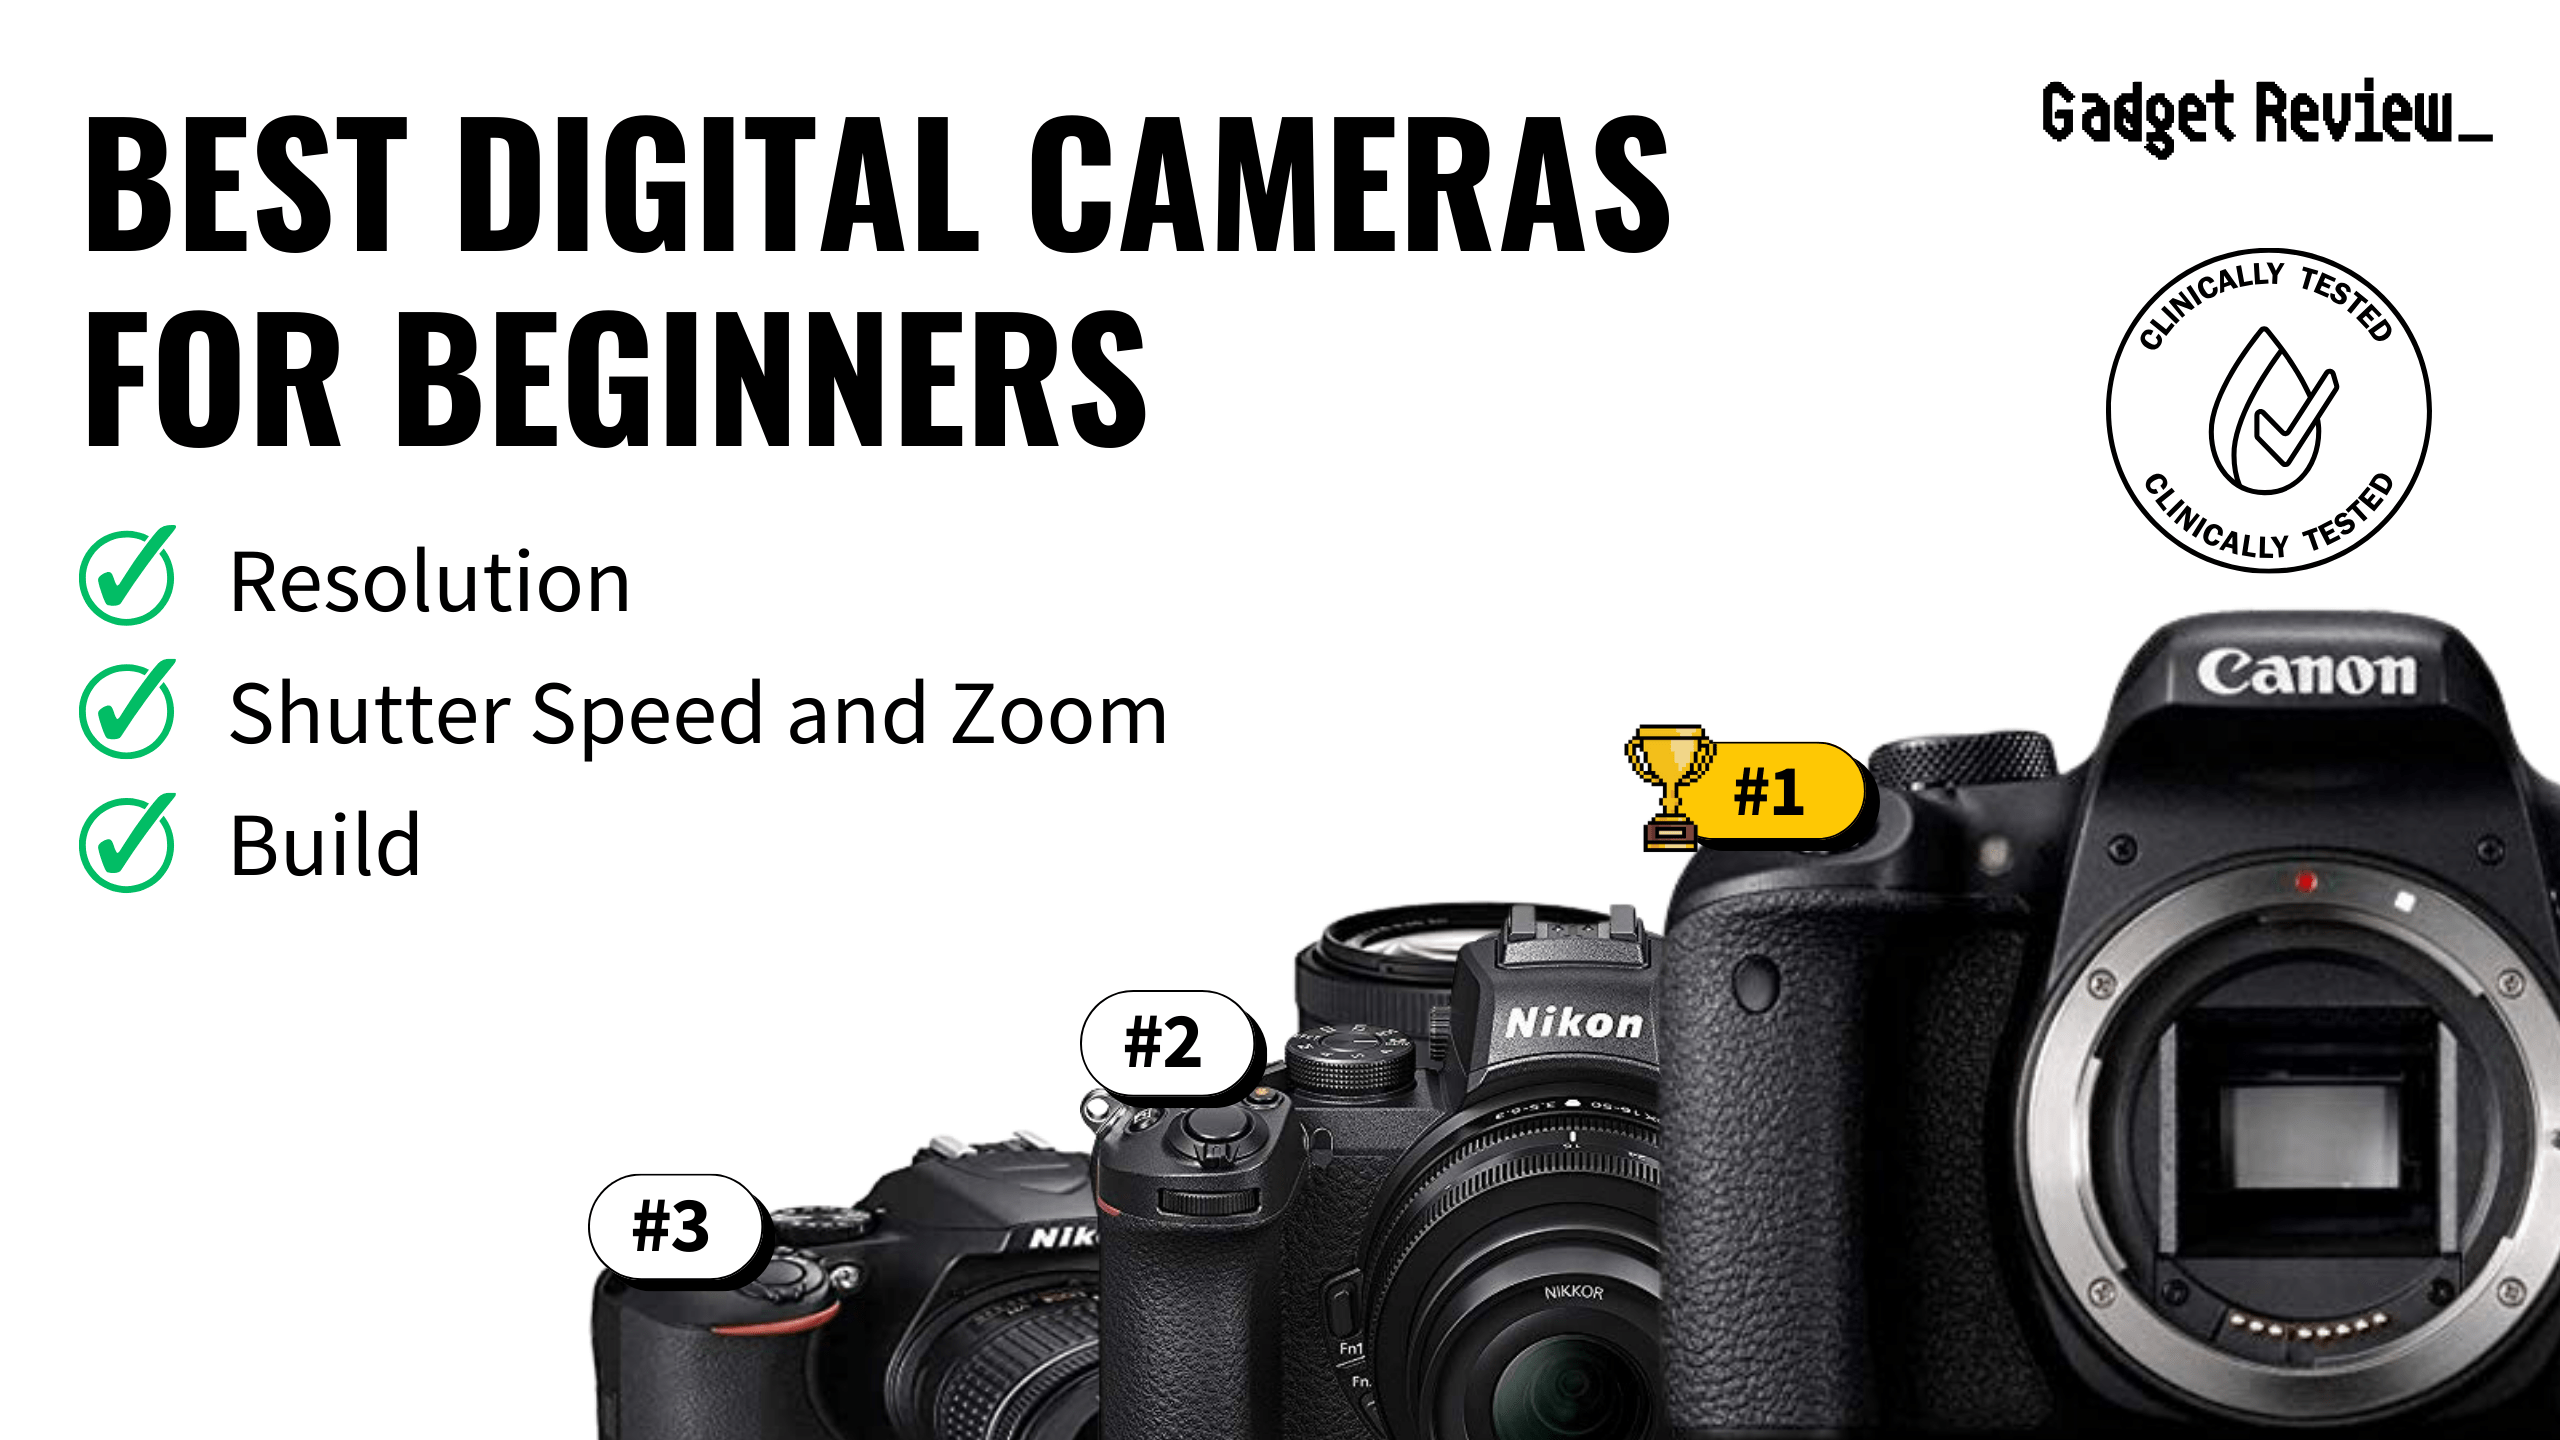 best digital camera beginners featured image that shows the top three best digital camera models